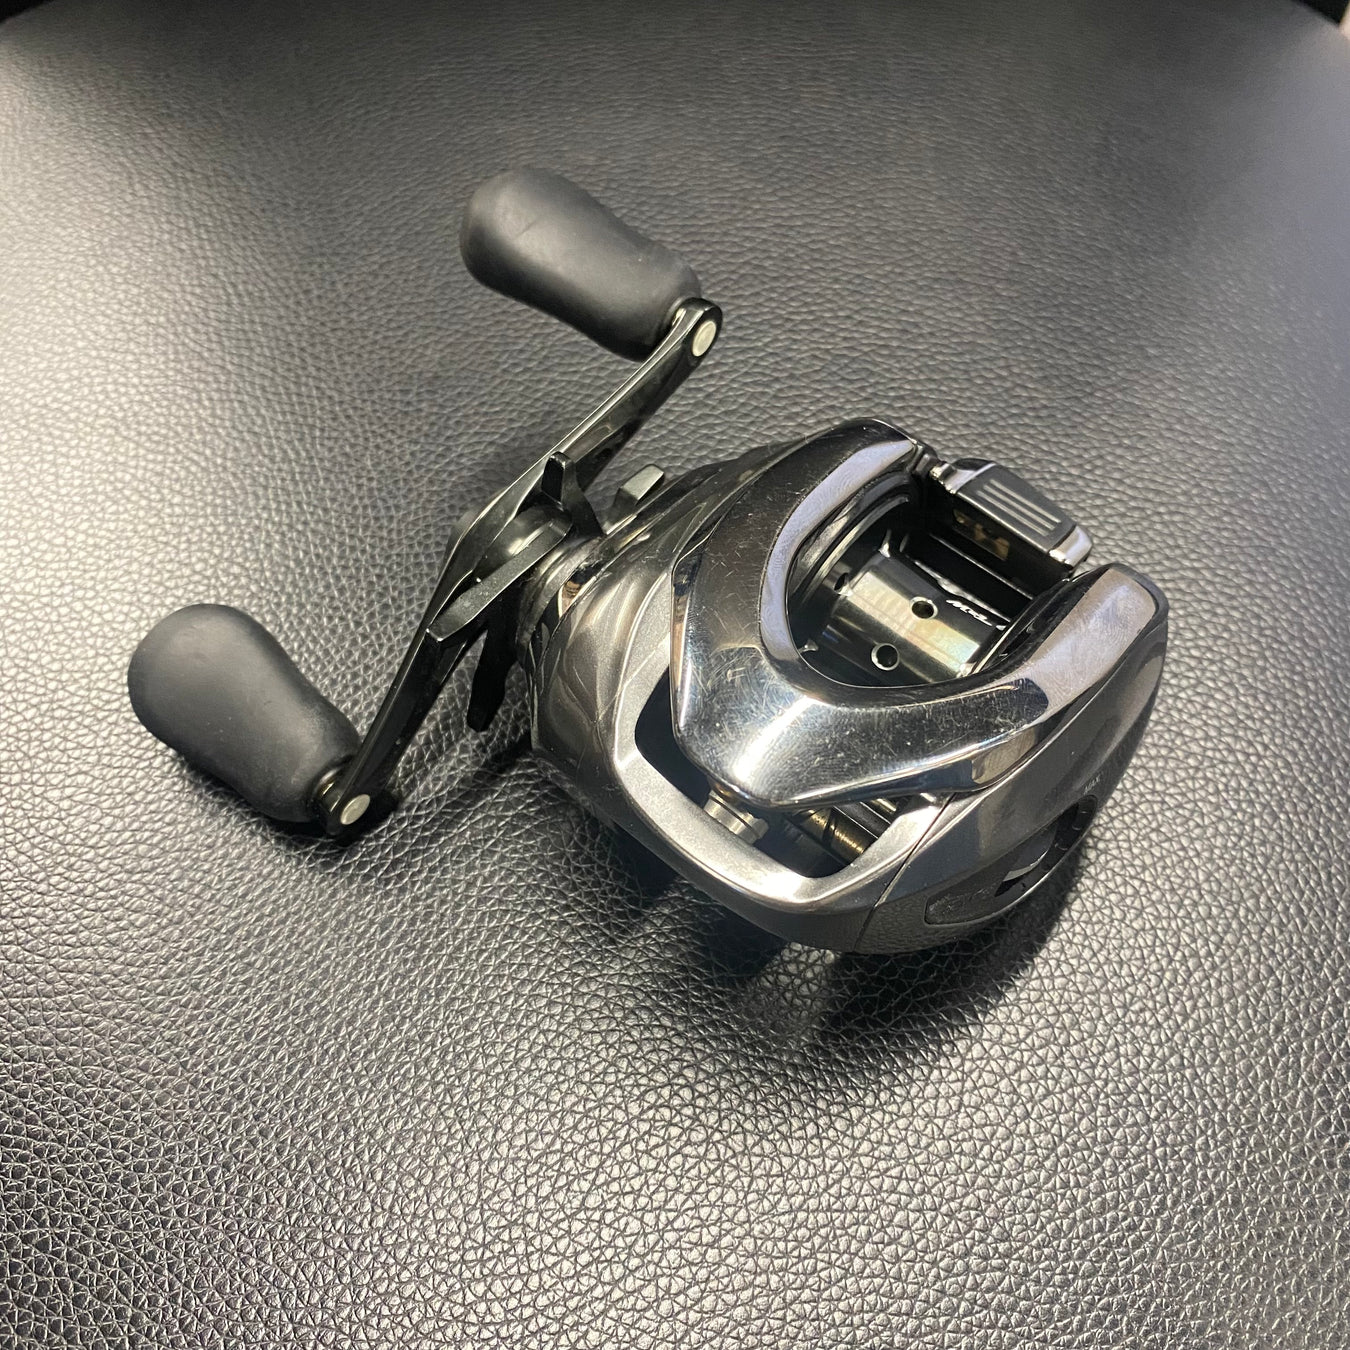 Used Rods and Reels (New)